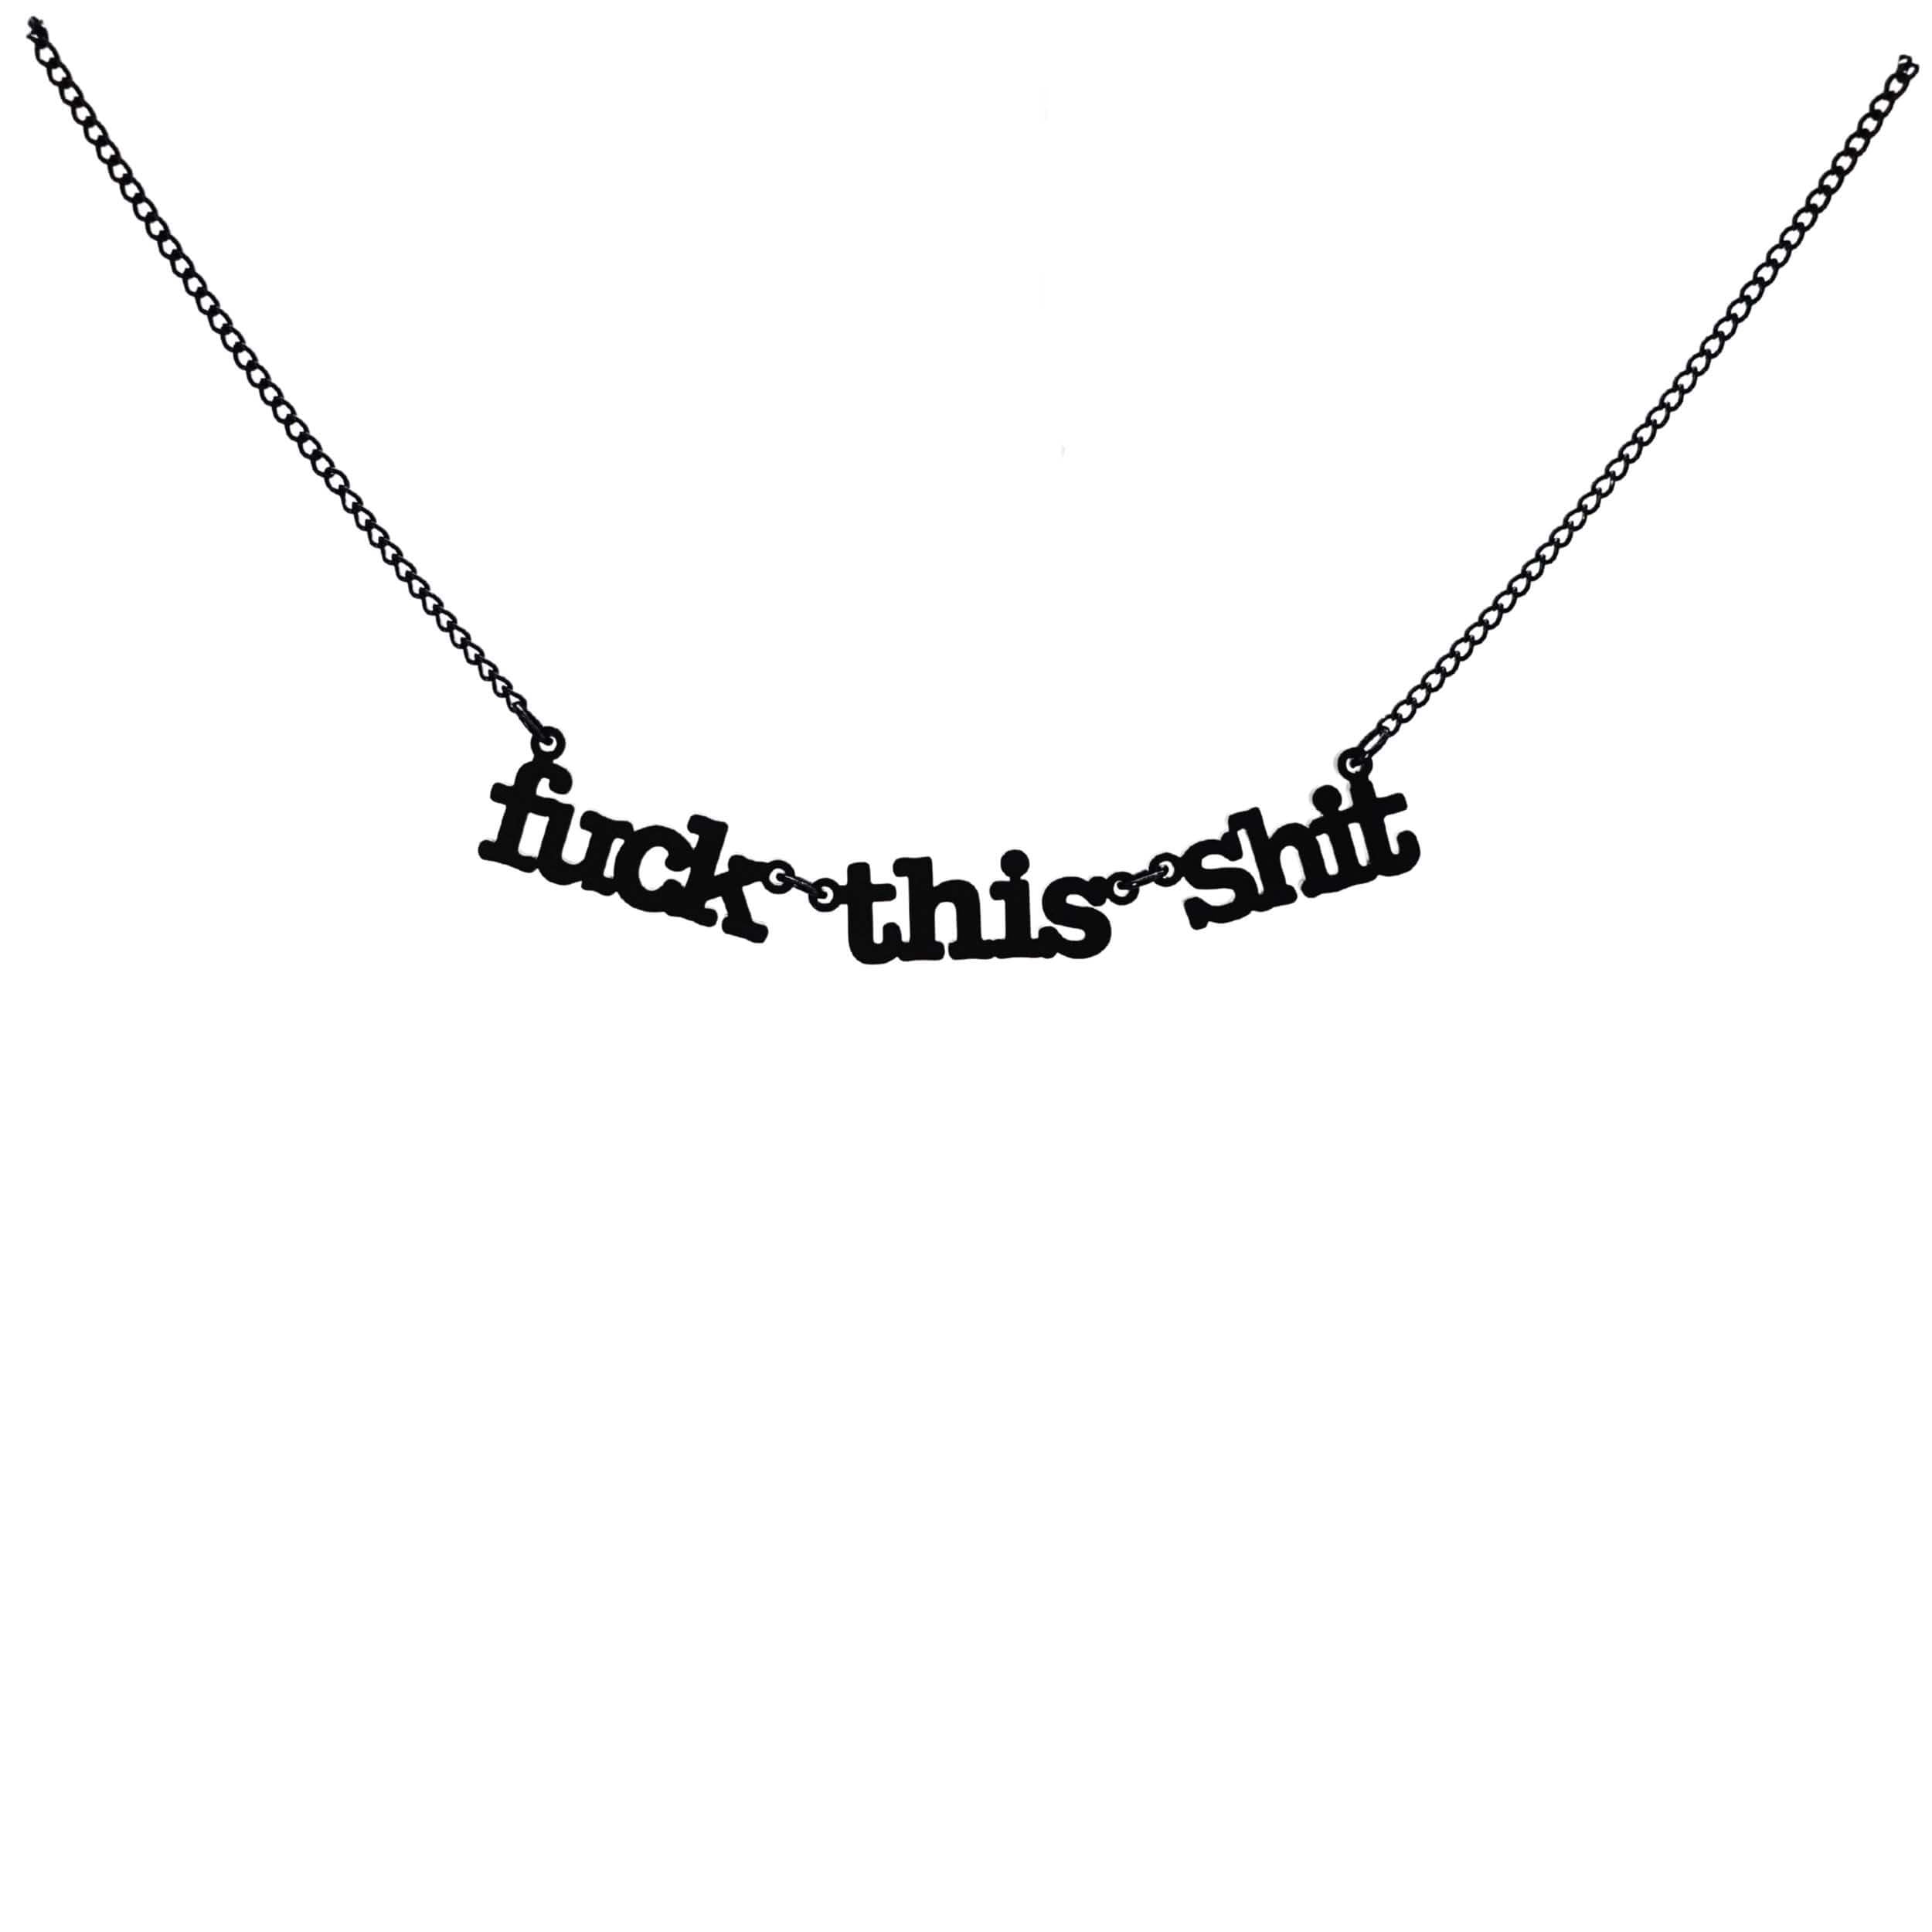 F*ck this sh*t necklace in matte black shown hanging against a white backround. 